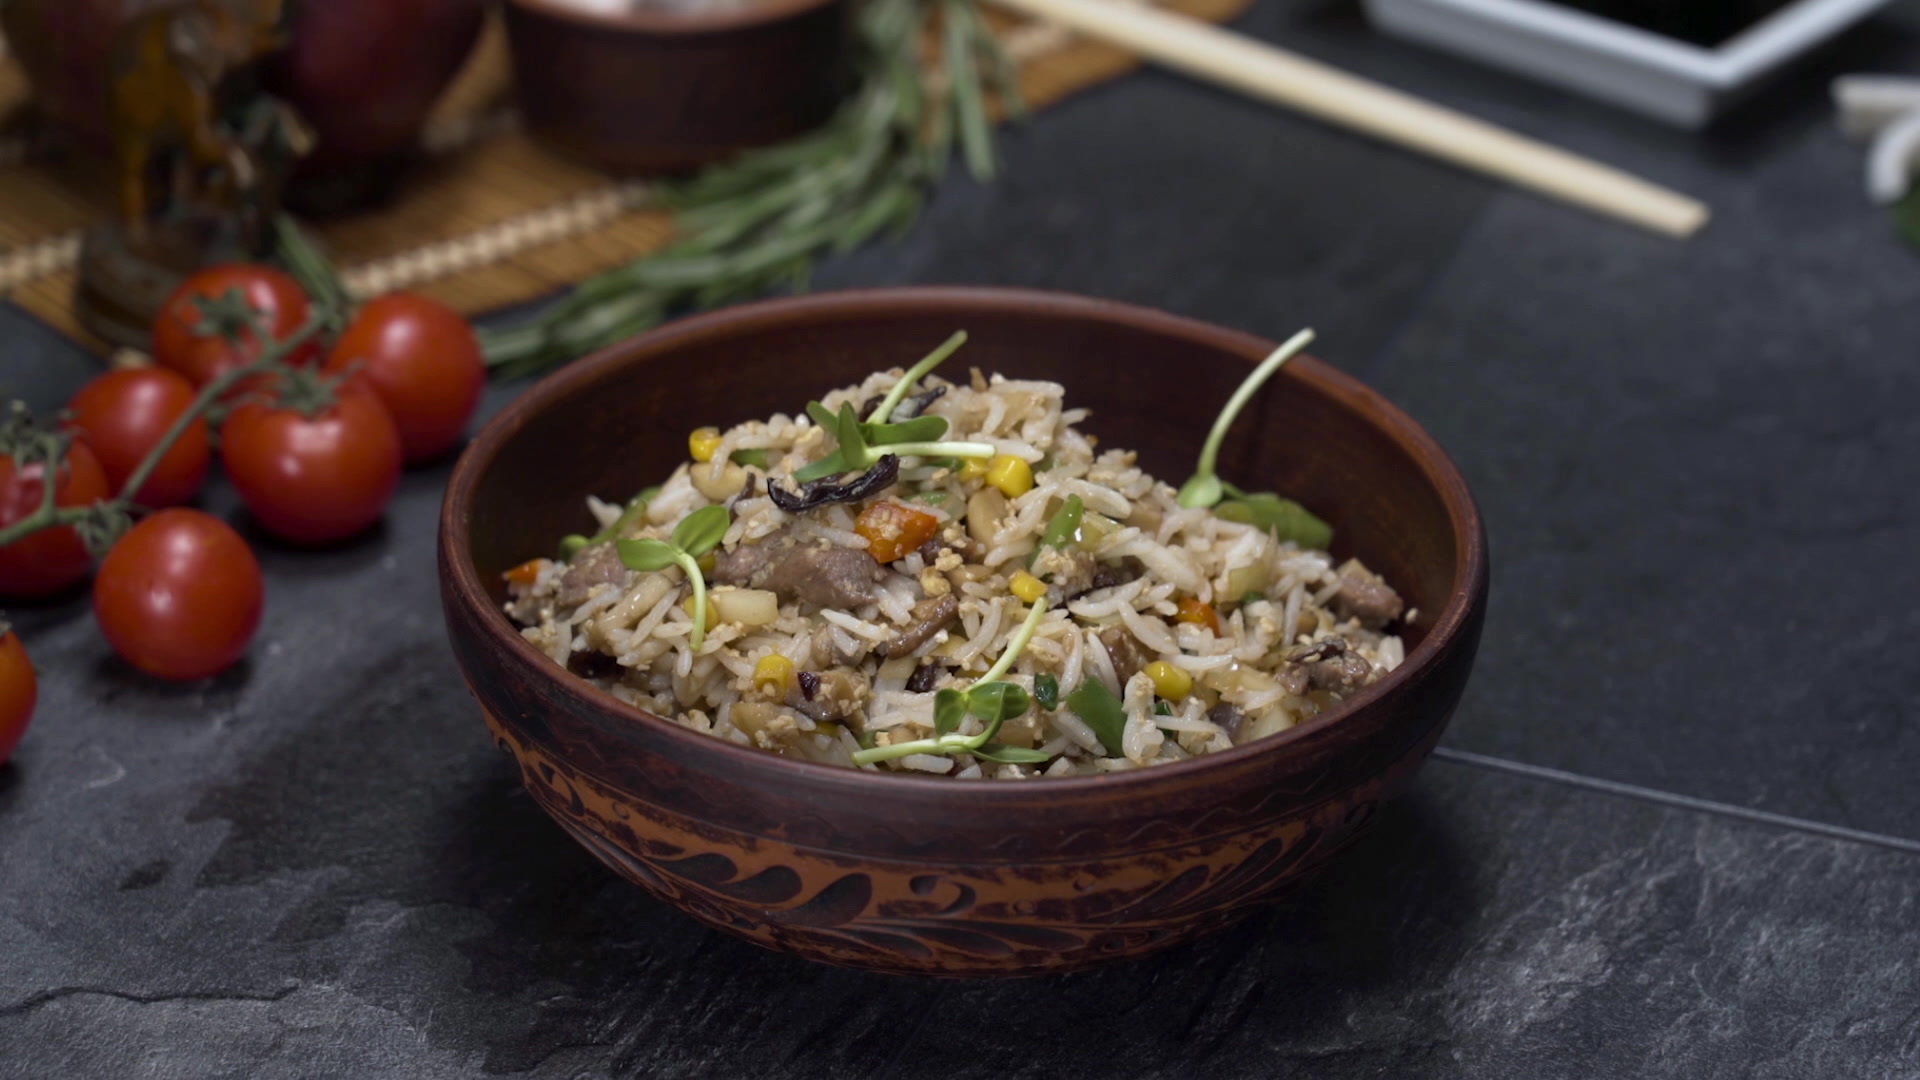 [RECIPE] Fried rice with mushrooms, beef and green beans